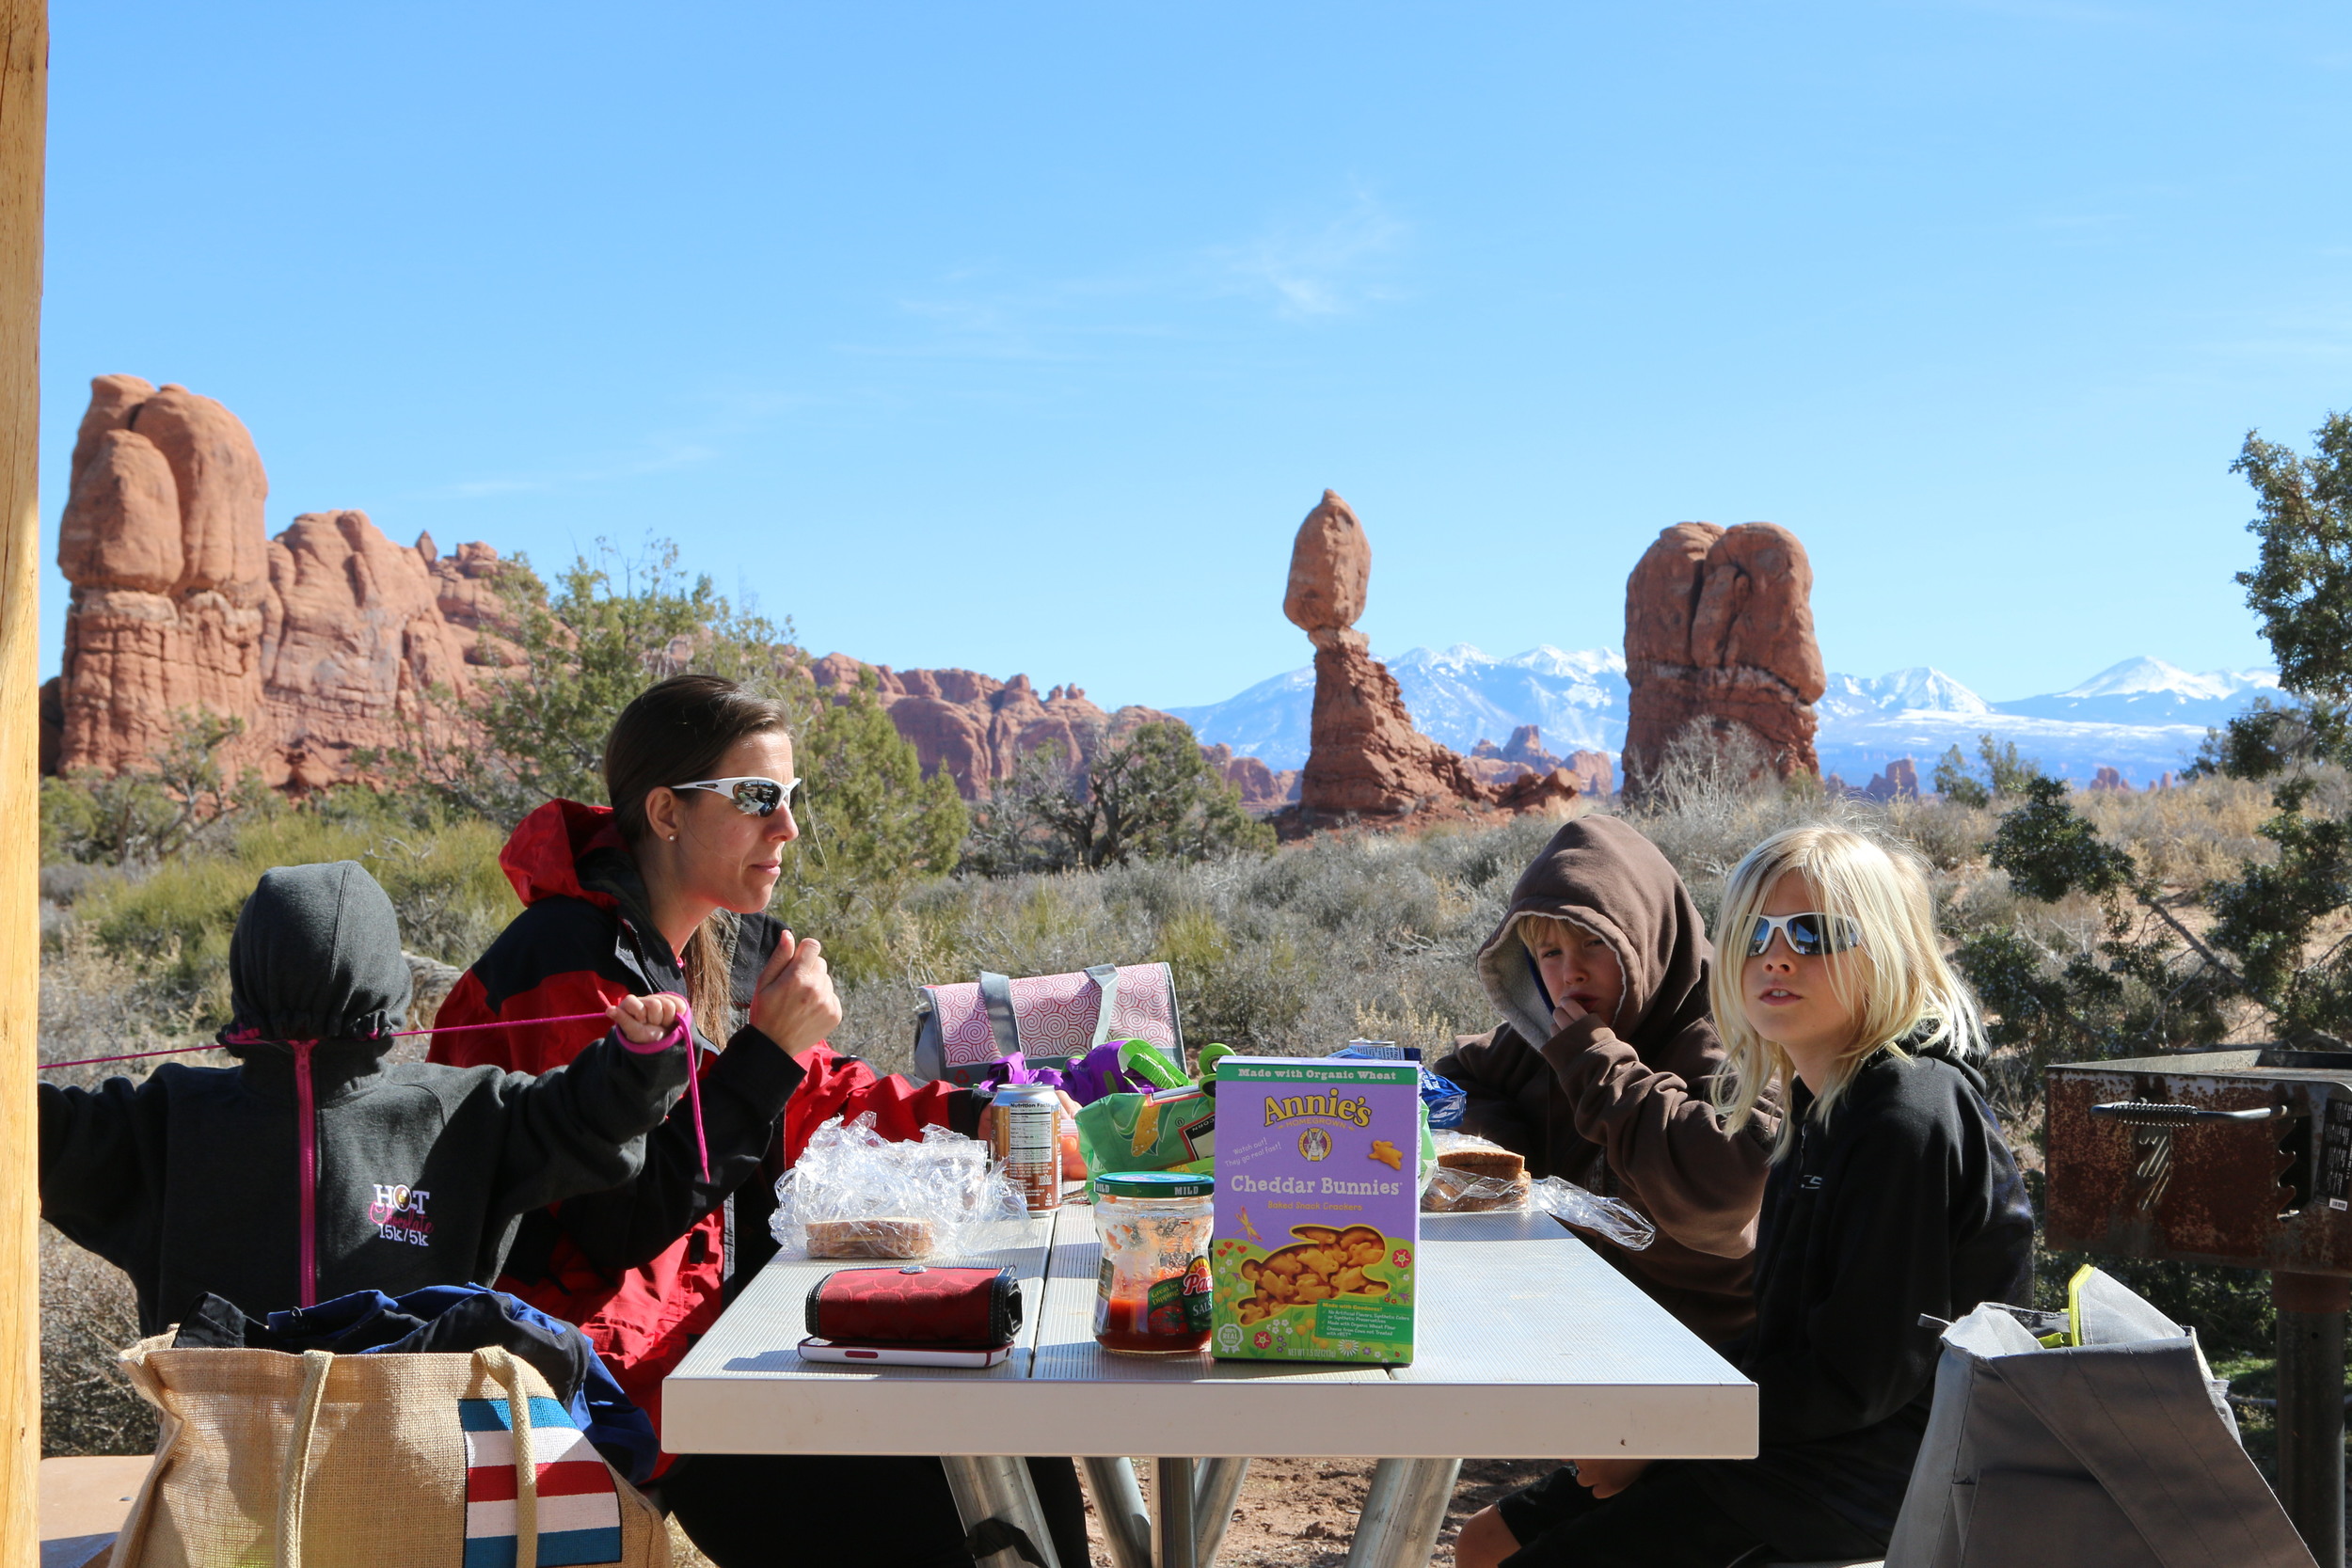 Arches NP: picnicking on a cold day.